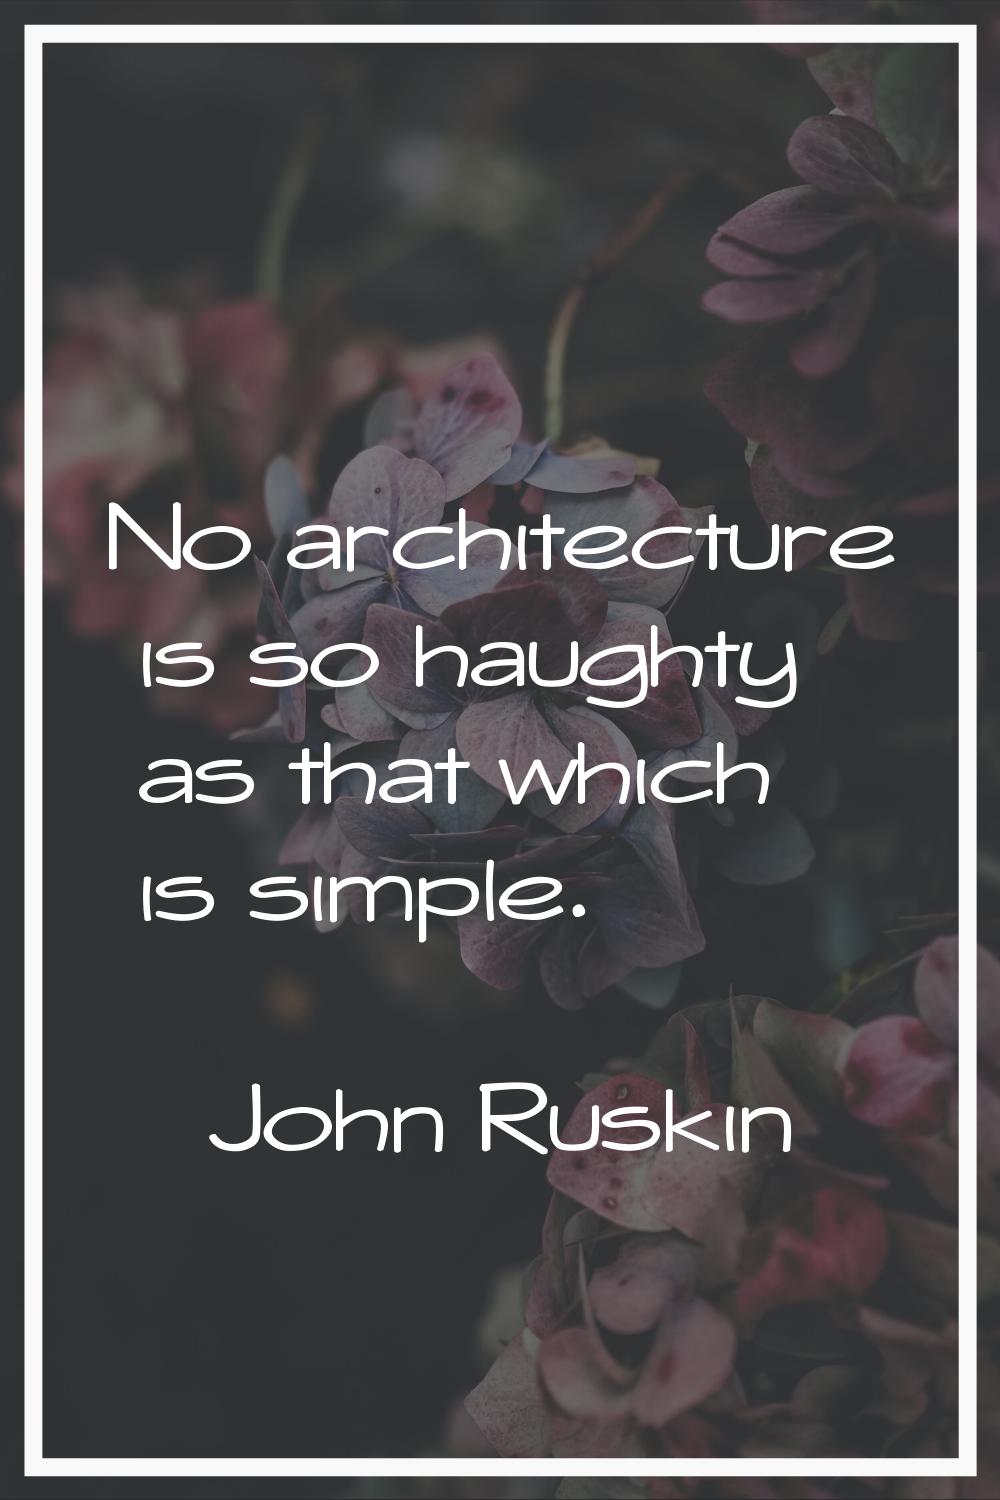 No architecture is so haughty as that which is simple.